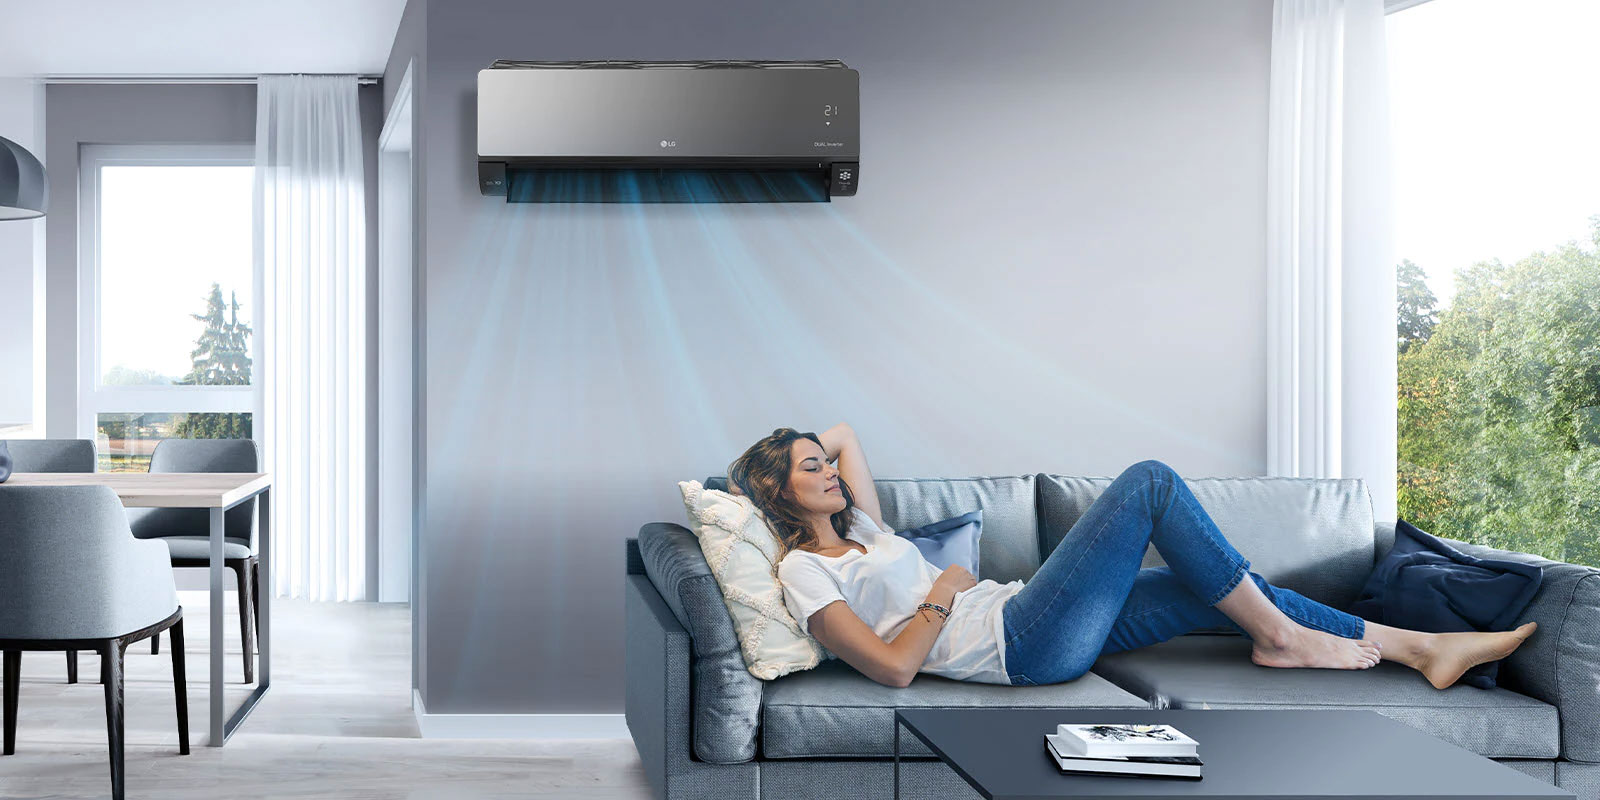 A woman lounges on a couch in a living room with the LG air conditioner installed above her on the wall. Blue streams of air are on the image to indicate it is on and cooling the room.